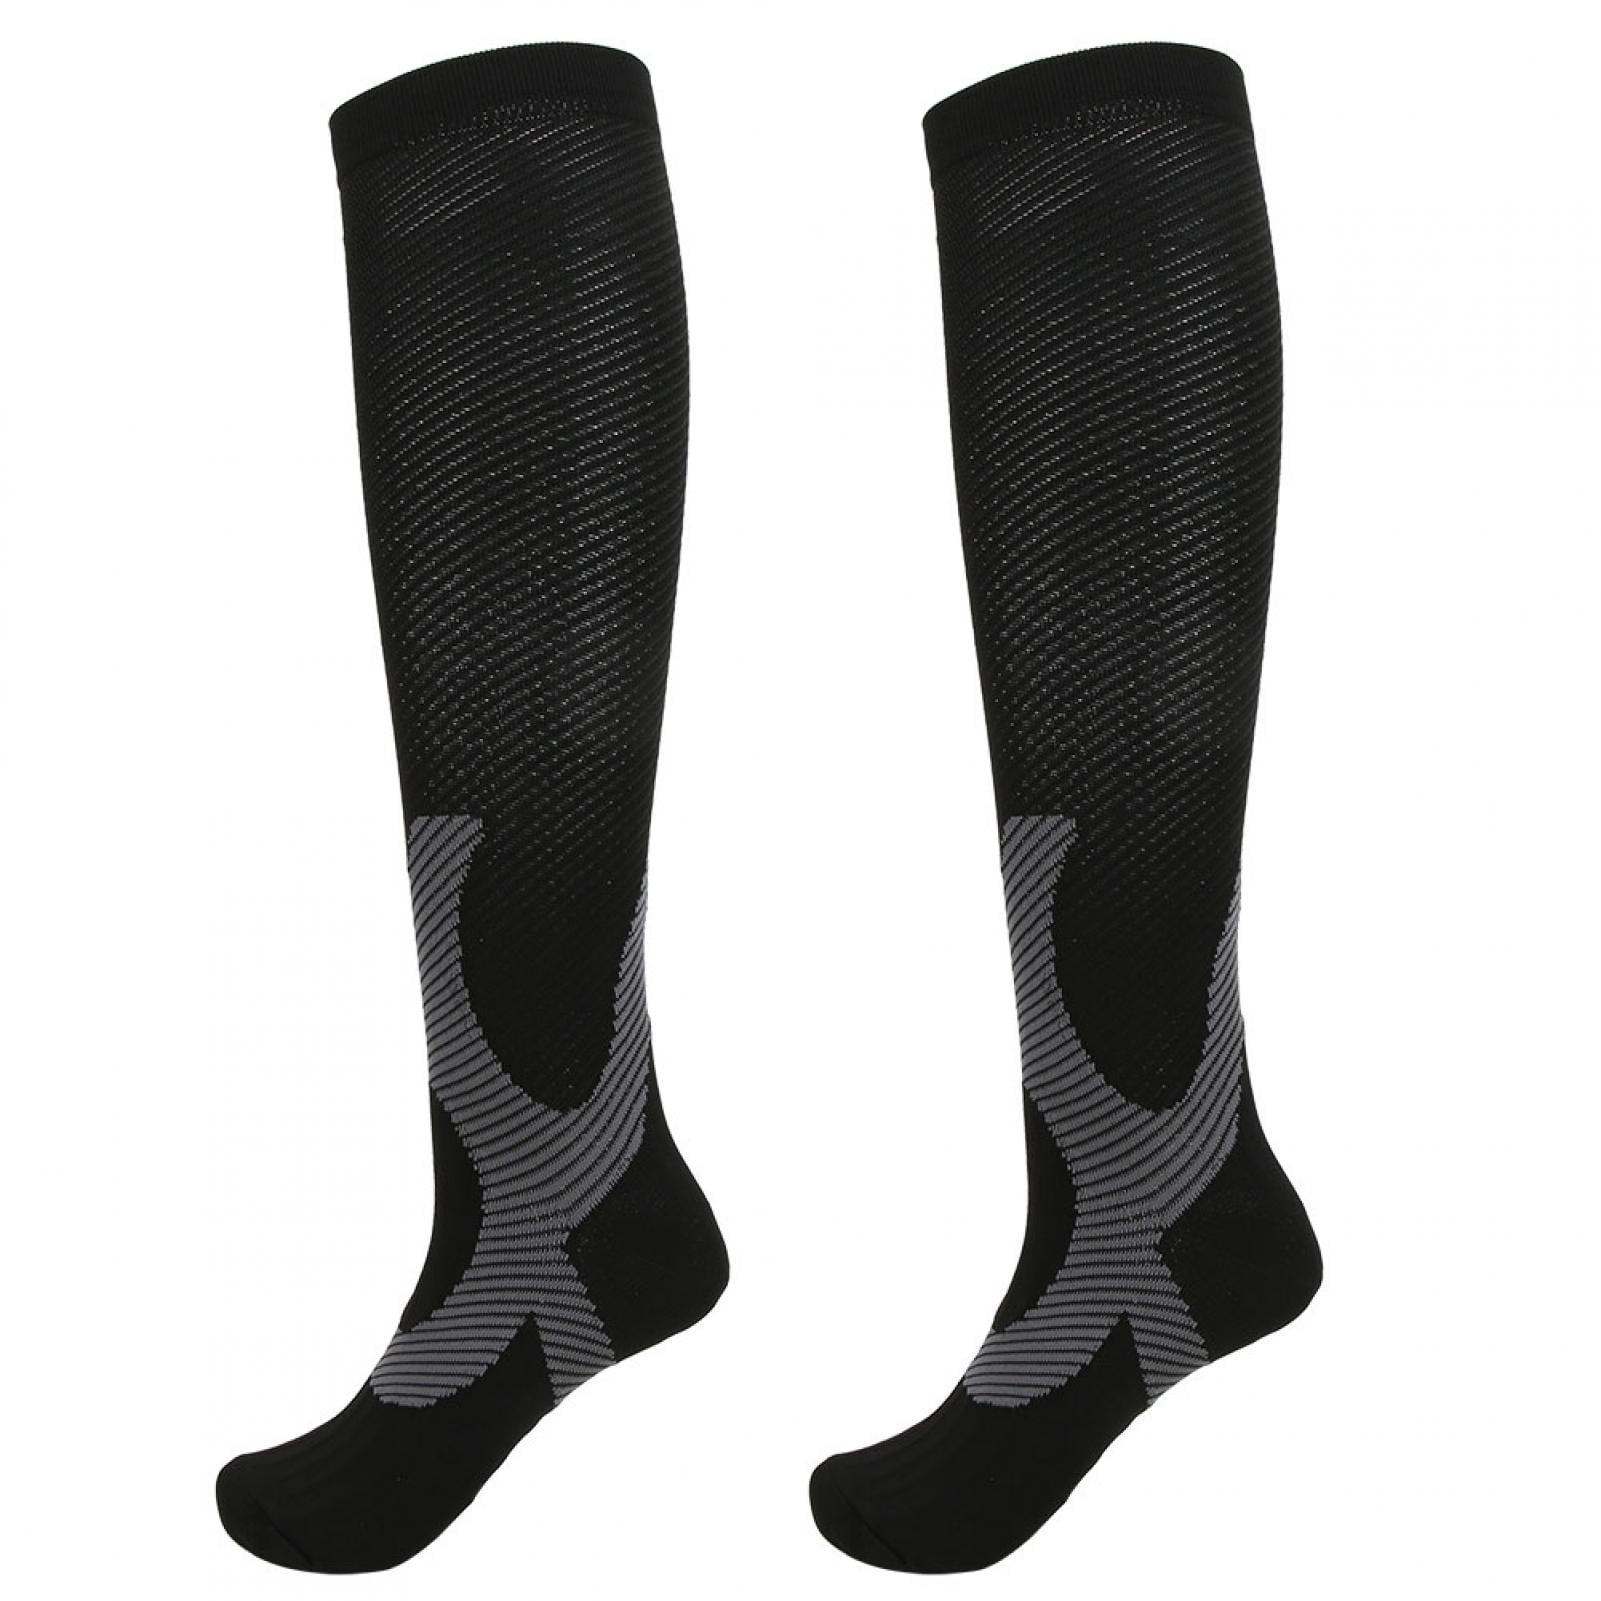 Nylon Chinlon Infused Compression Socks Sport Fitness Ankle Mens Womens S-XL 